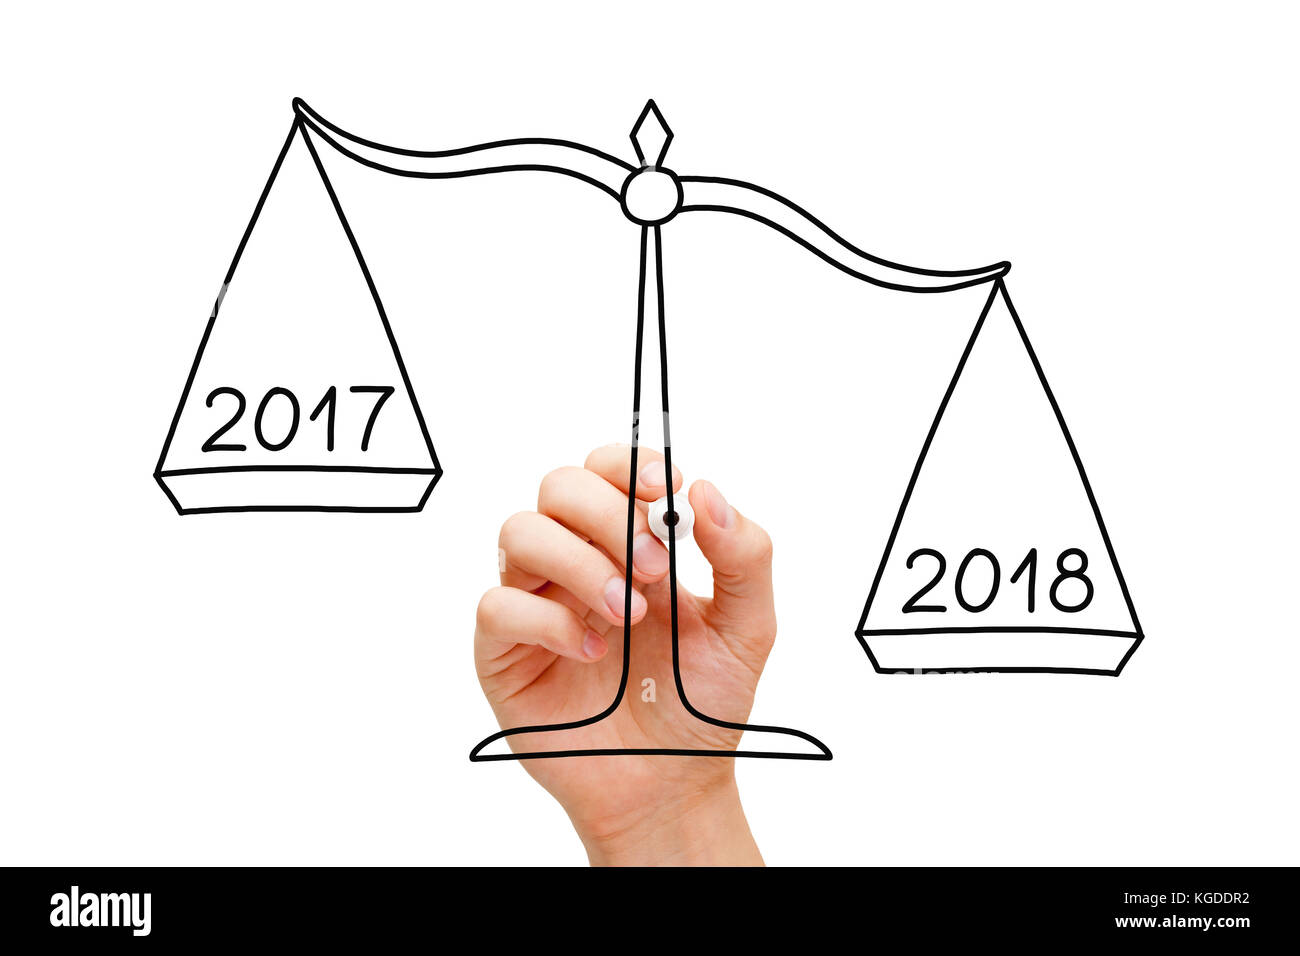 Hand drawing scale concept with marker on transparent wipe board isolated on white. Year 2018 is better than 2017. Stock Photo